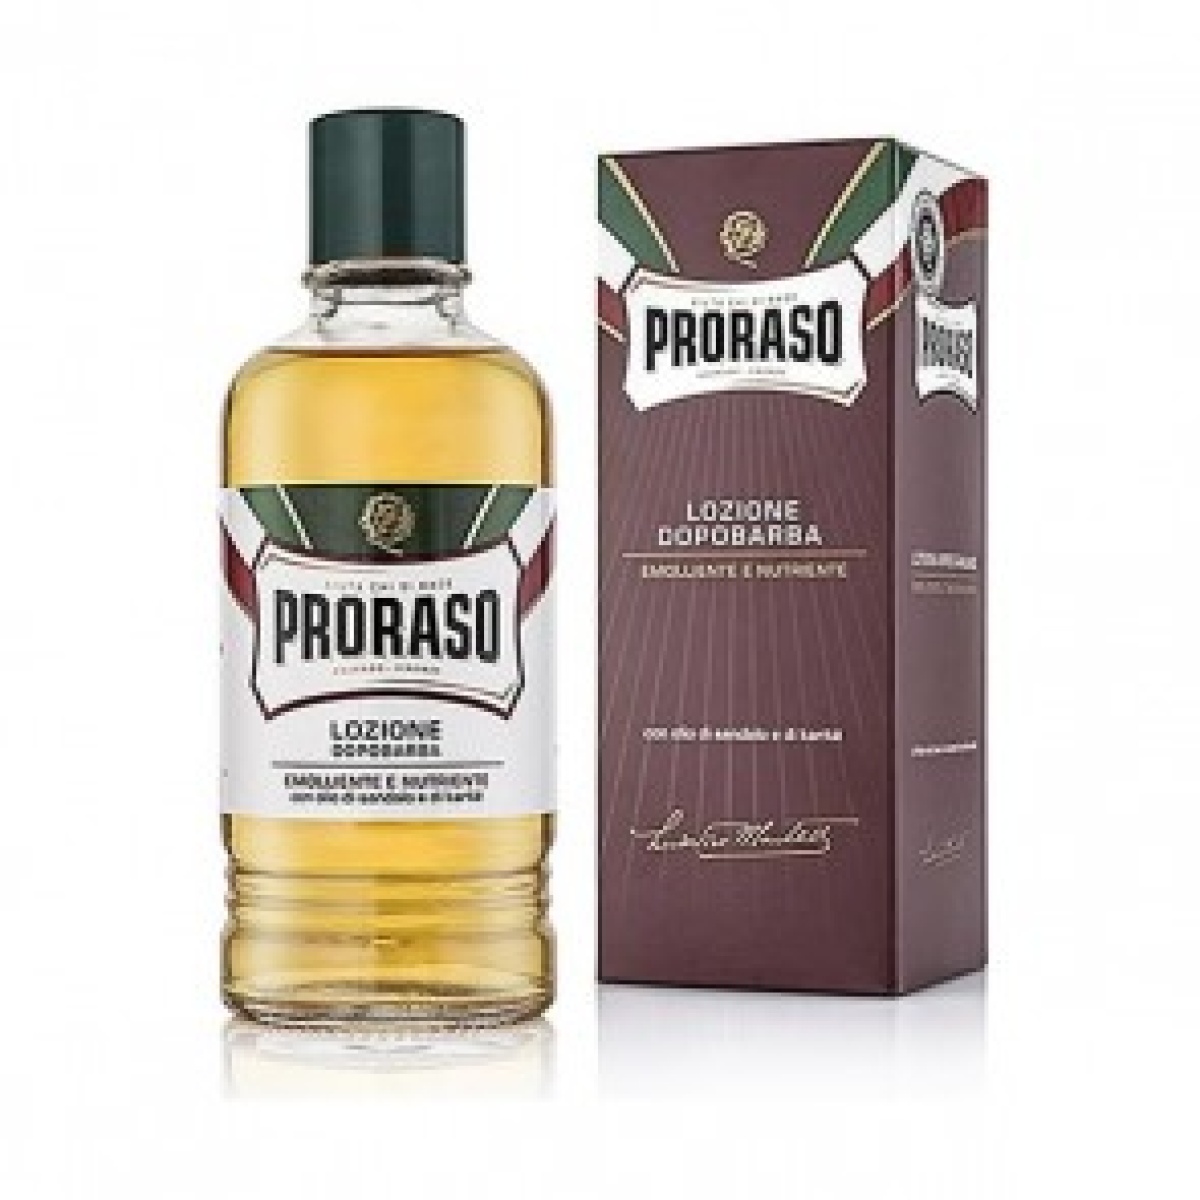 Proraso After Shave Lotion Sandalwood & Shea Butter - 400ml-0